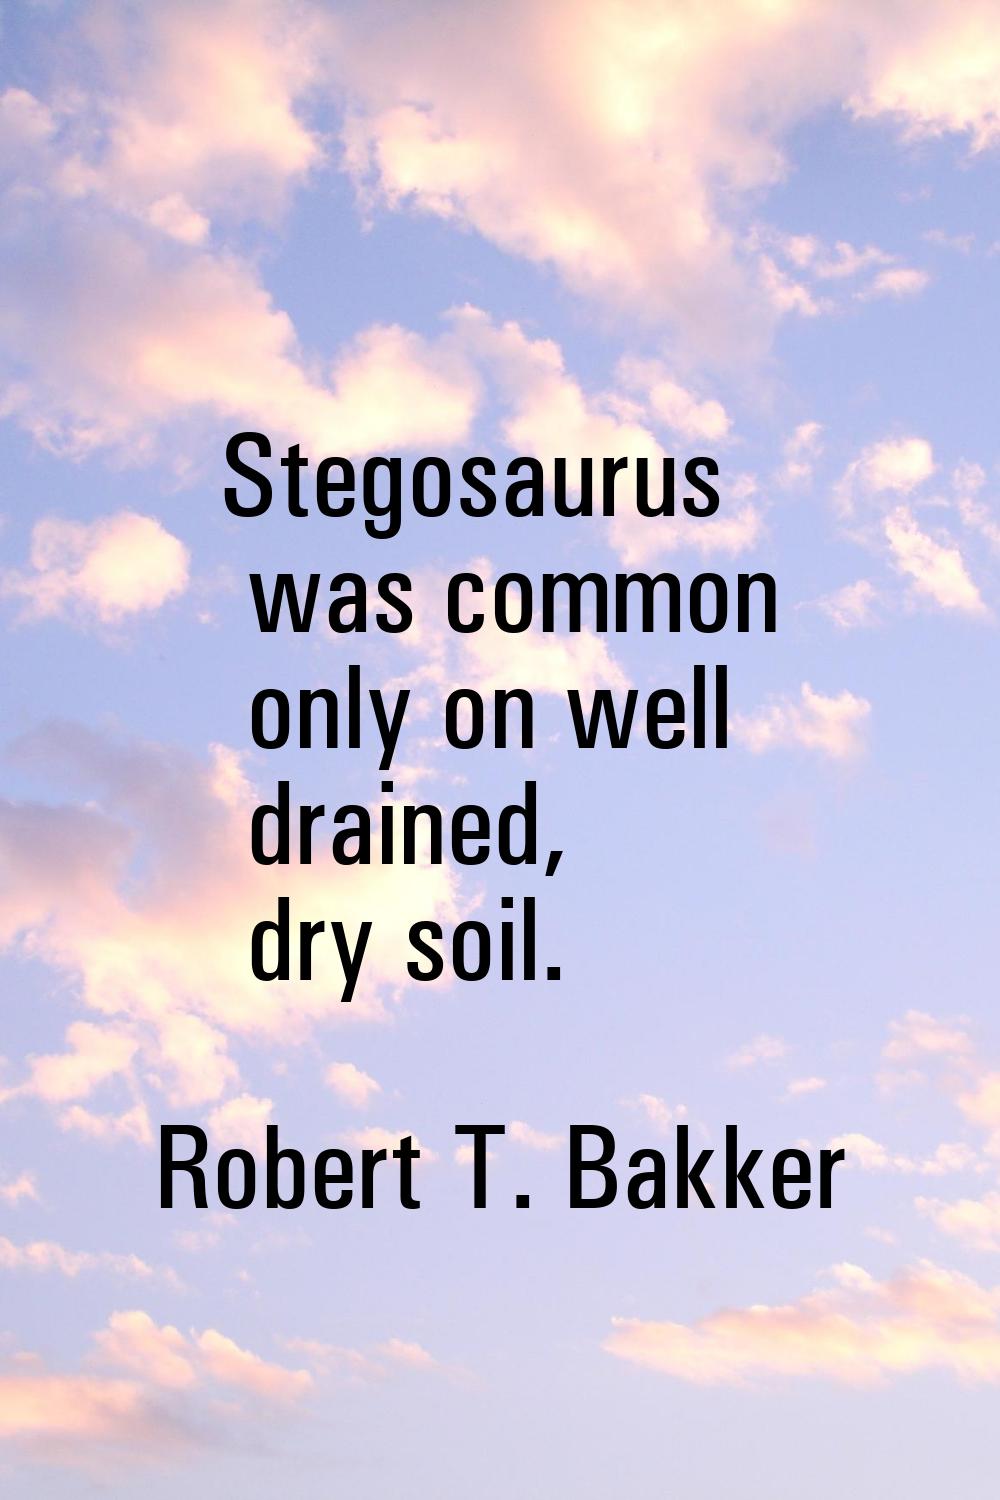 Stegosaurus was common only on well drained, dry soil.